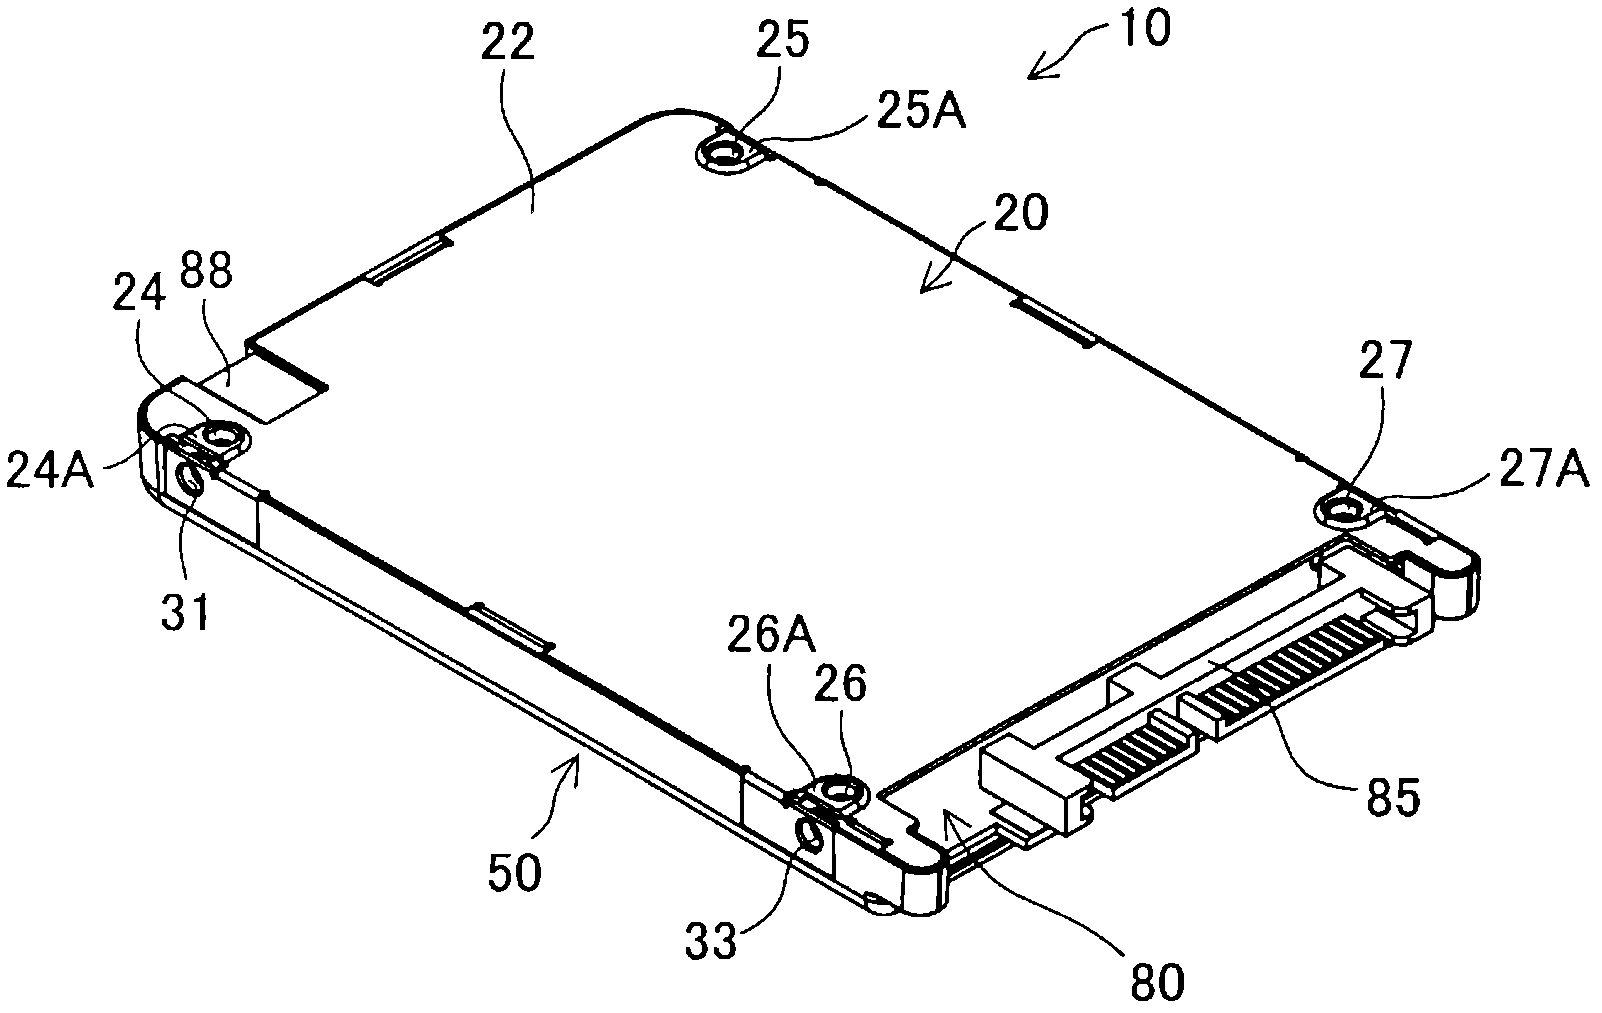 External storing device and its housing